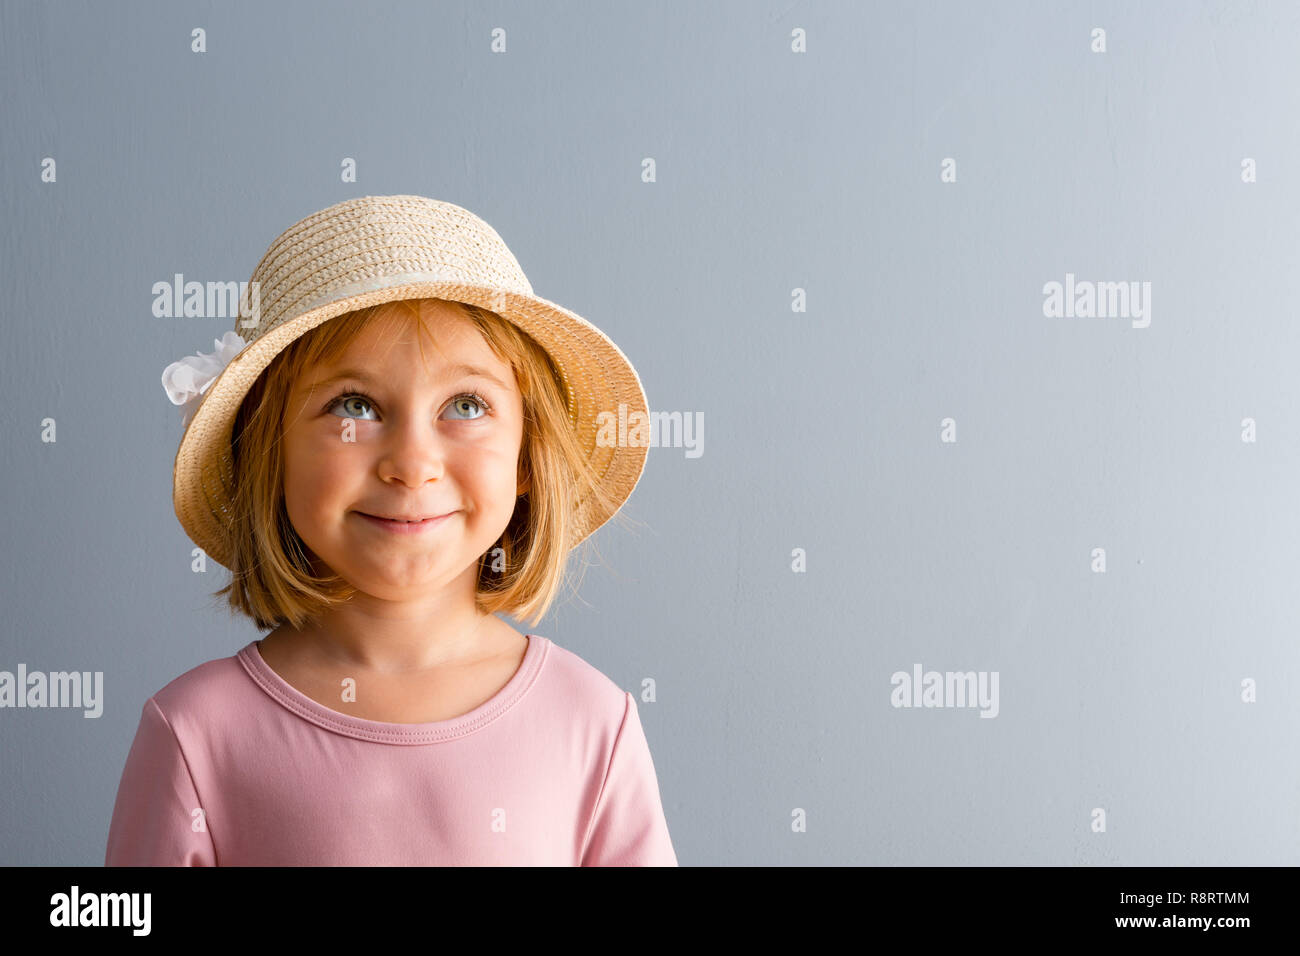 Cute little blond girl daydreaming with a happy smile looking up into the air letting her imagination run free over a blue background with copy space Stock Photo